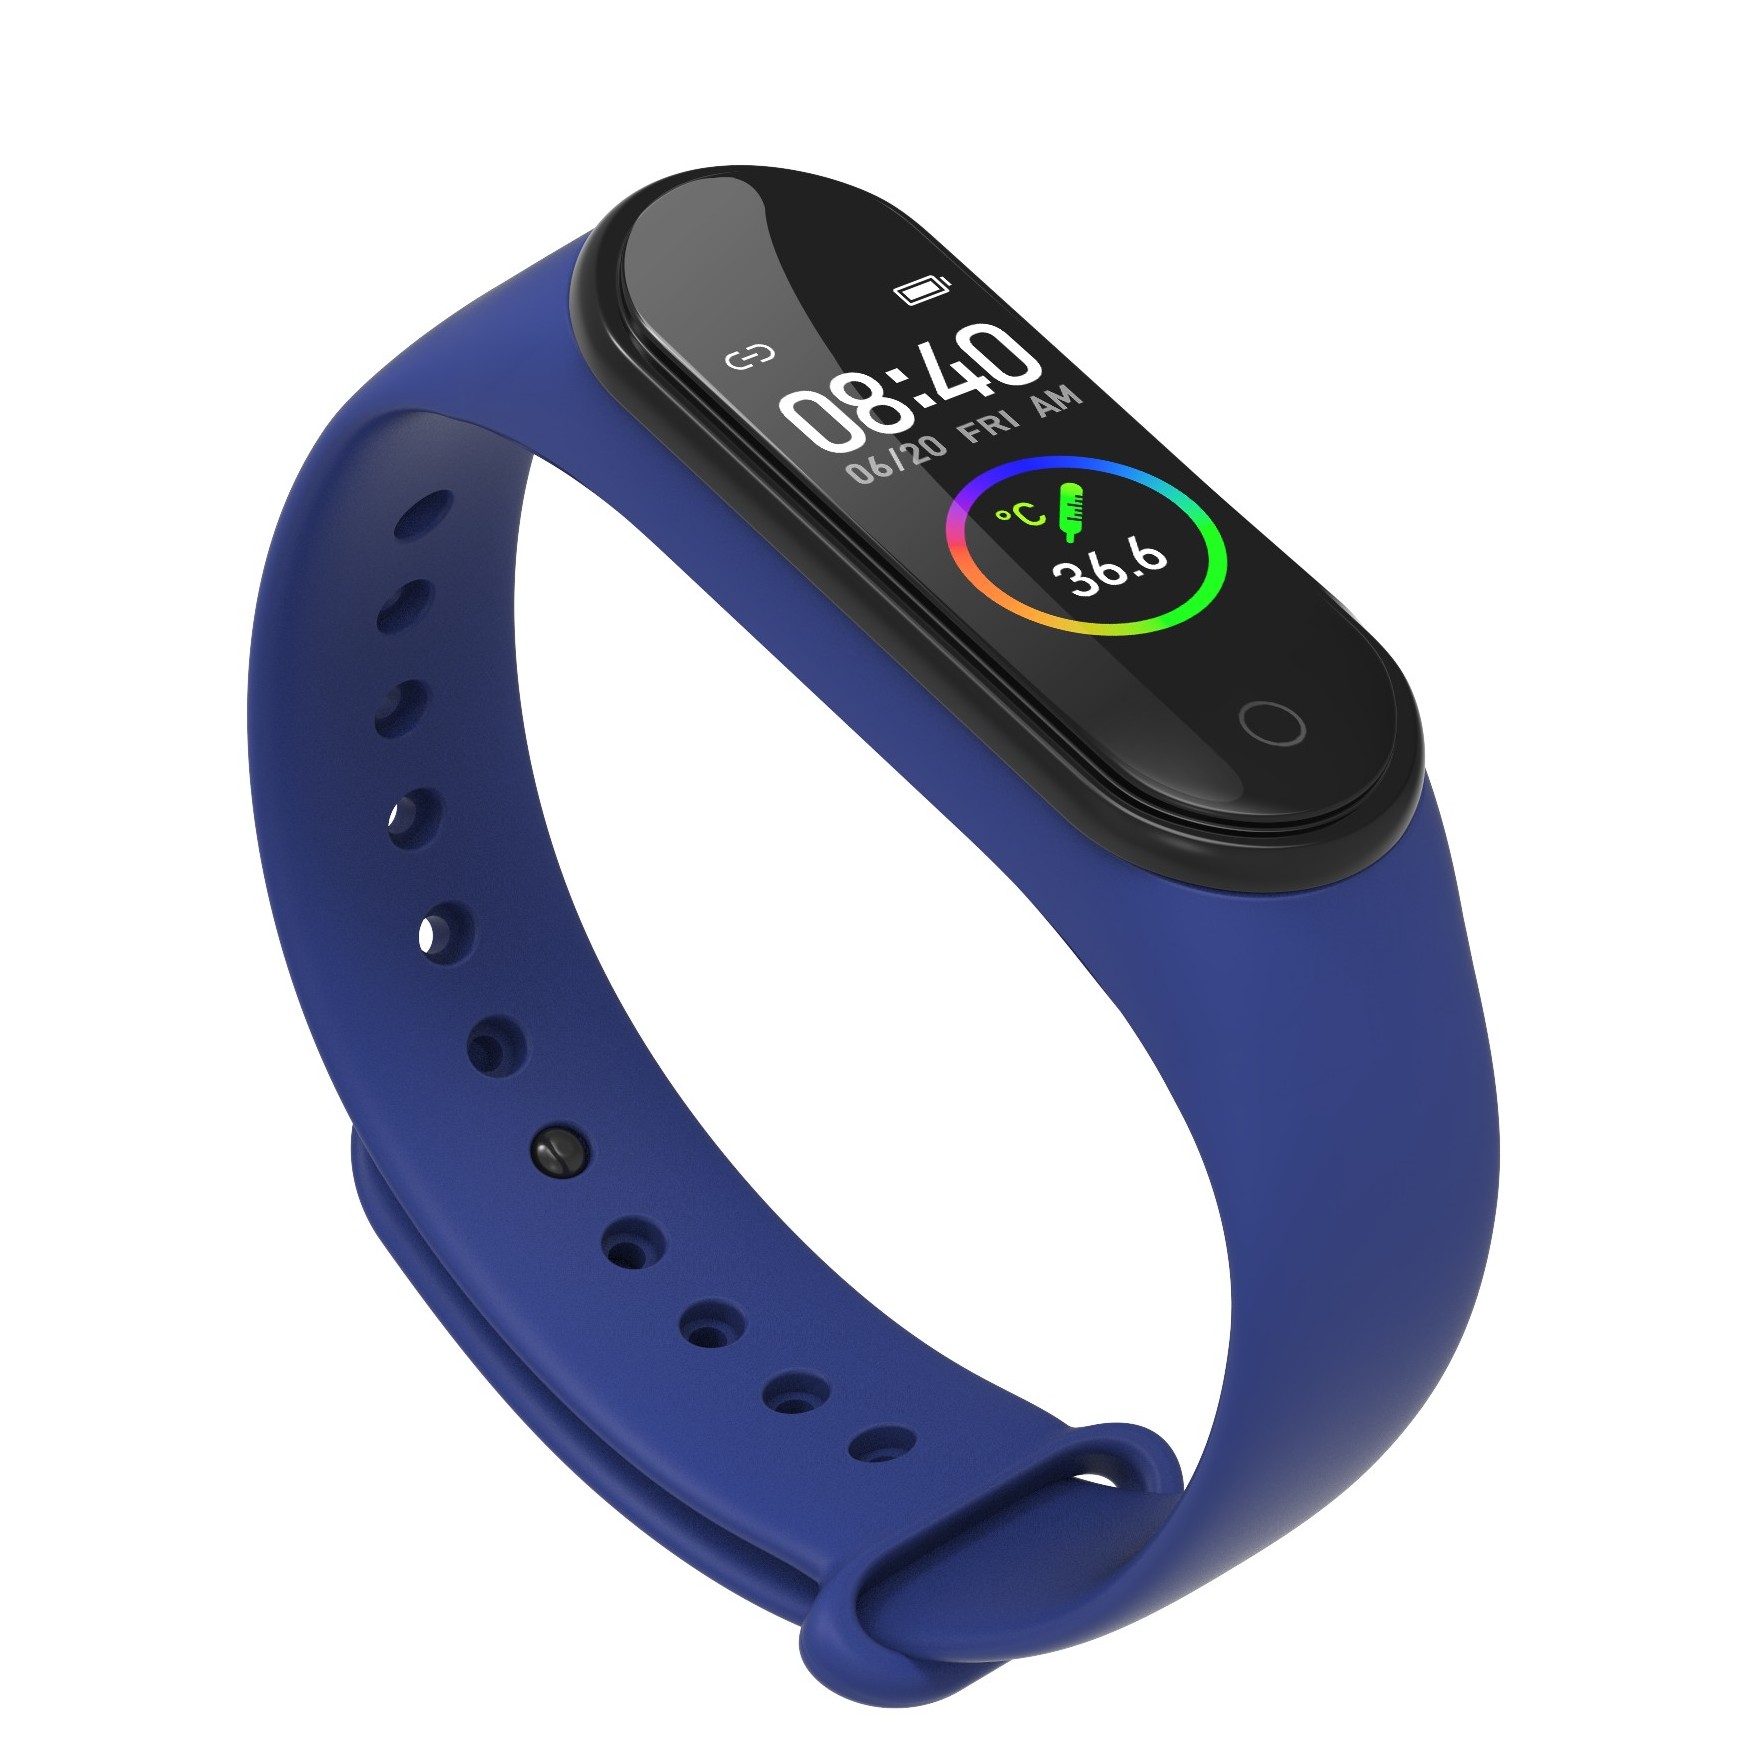 New IP67 Waterproof Body Temperature Smart Health Wristband with SPo2 